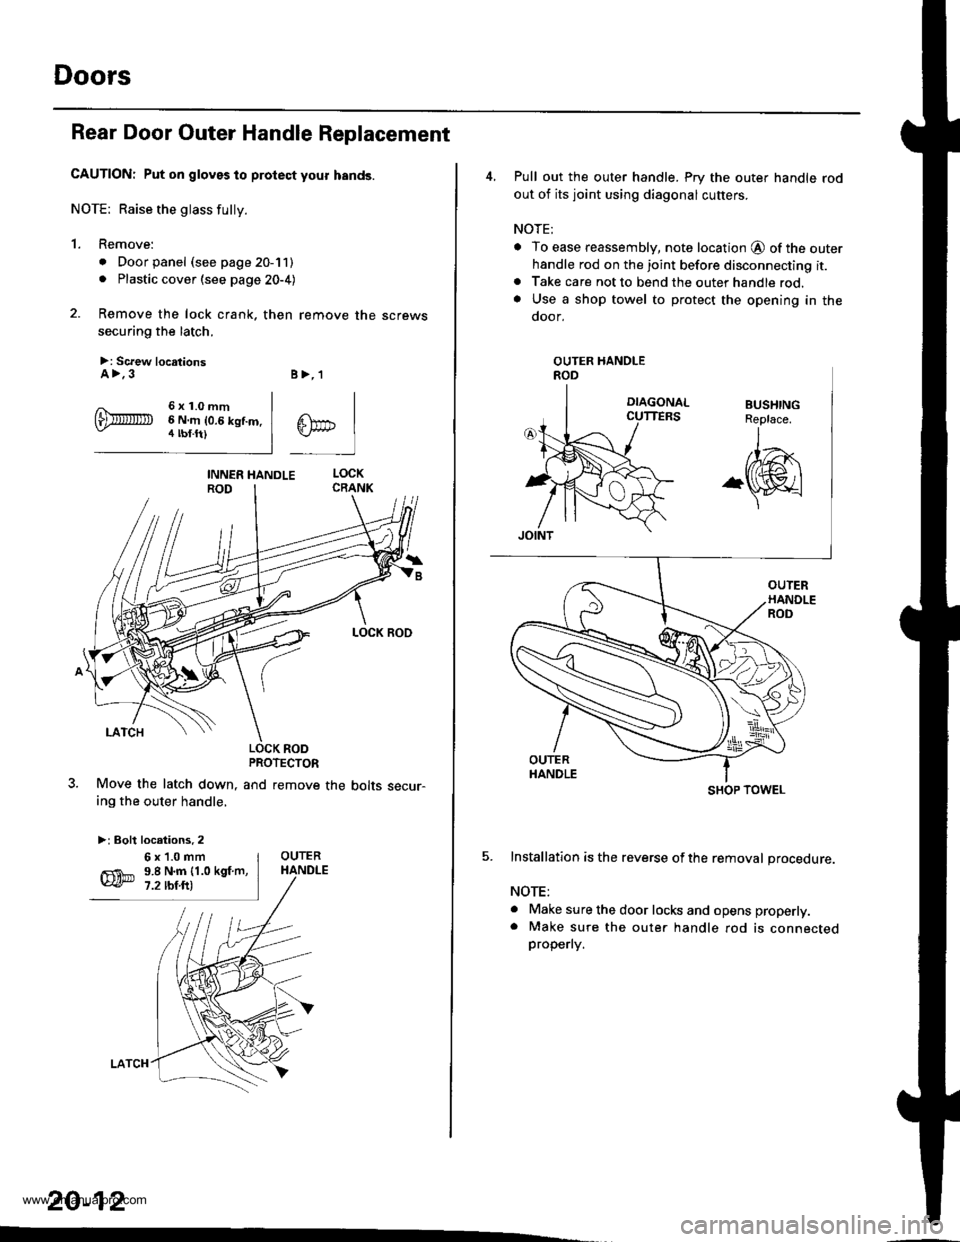 HONDA CR-V 1998 RD1-RD3 / 1.G Workshop Manual 
Doors
Rear Door Outer Handle Replacement
CAUTION: Put on gloves to protect your hands.
NOTE: Raise the glass fully.
1. Remove:
. Door panel (see page 20-11). Plastic cover (see page 20-4)
2. Remove t